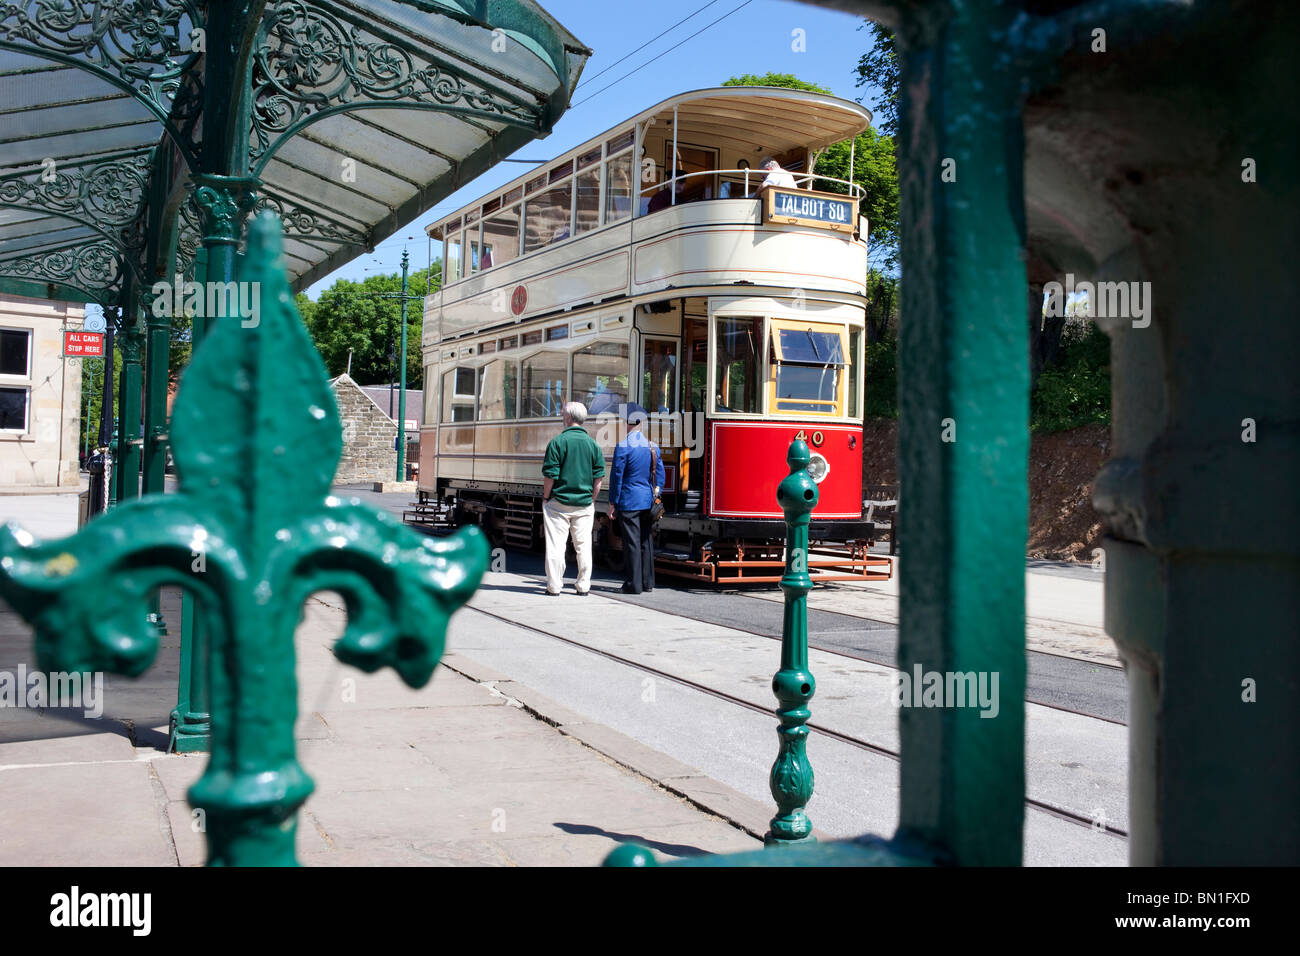 Tourists board a tram in front of the old Derby Assembly Rooms building at Crich Tramway Museum in the Peak District Stock Photo